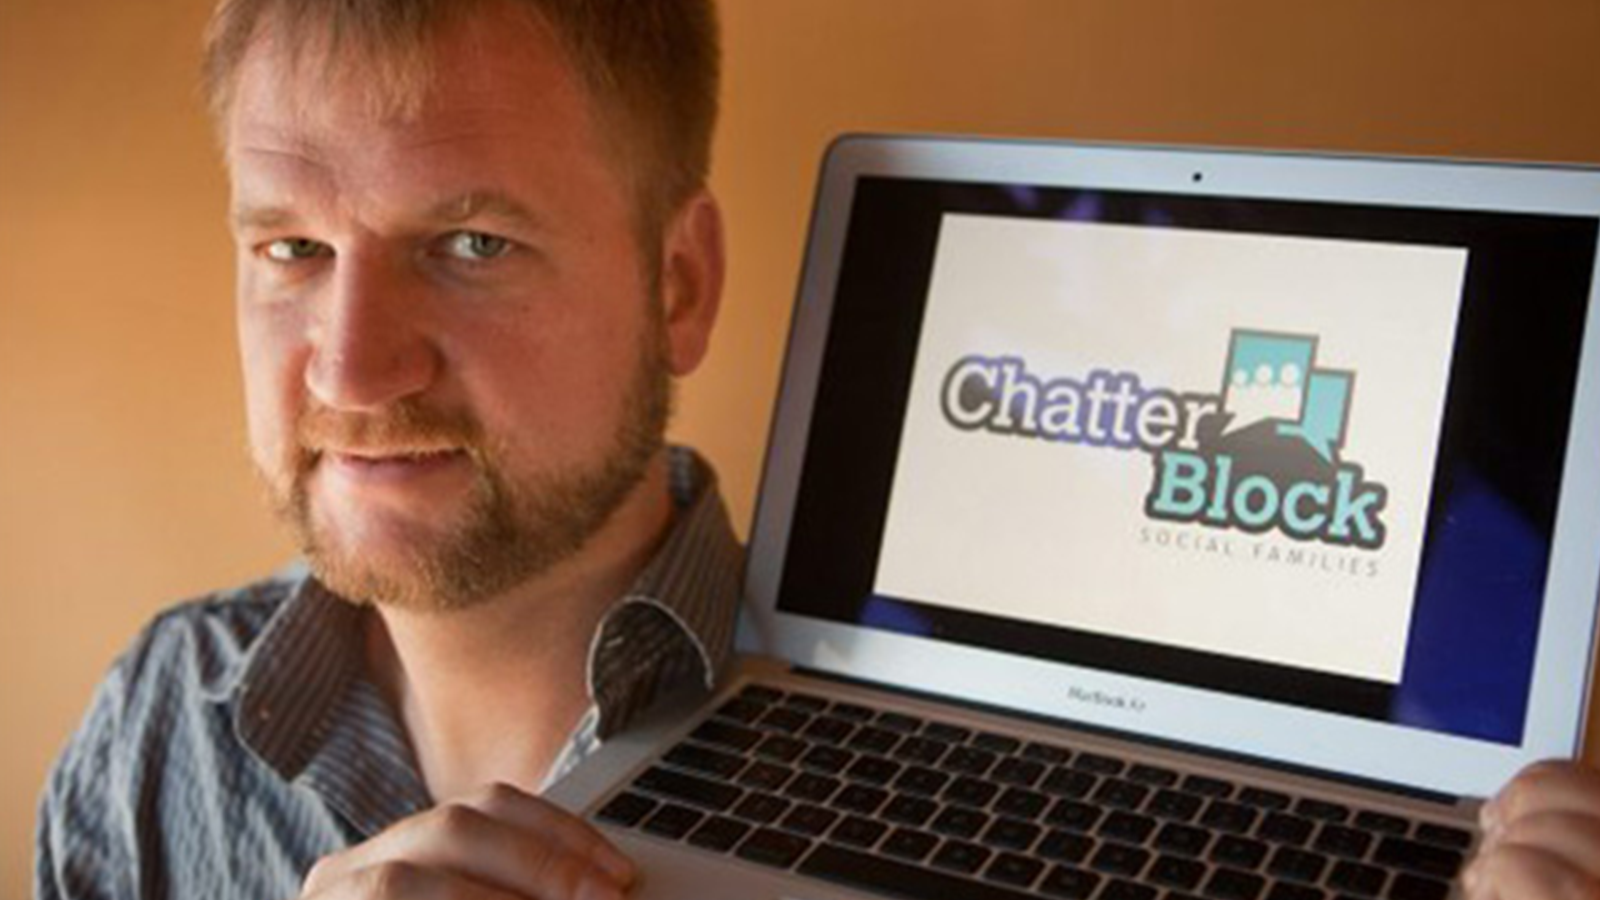 Victoria’s ChatterBlock Inc. uses ISI grant to hire development and marketing talent